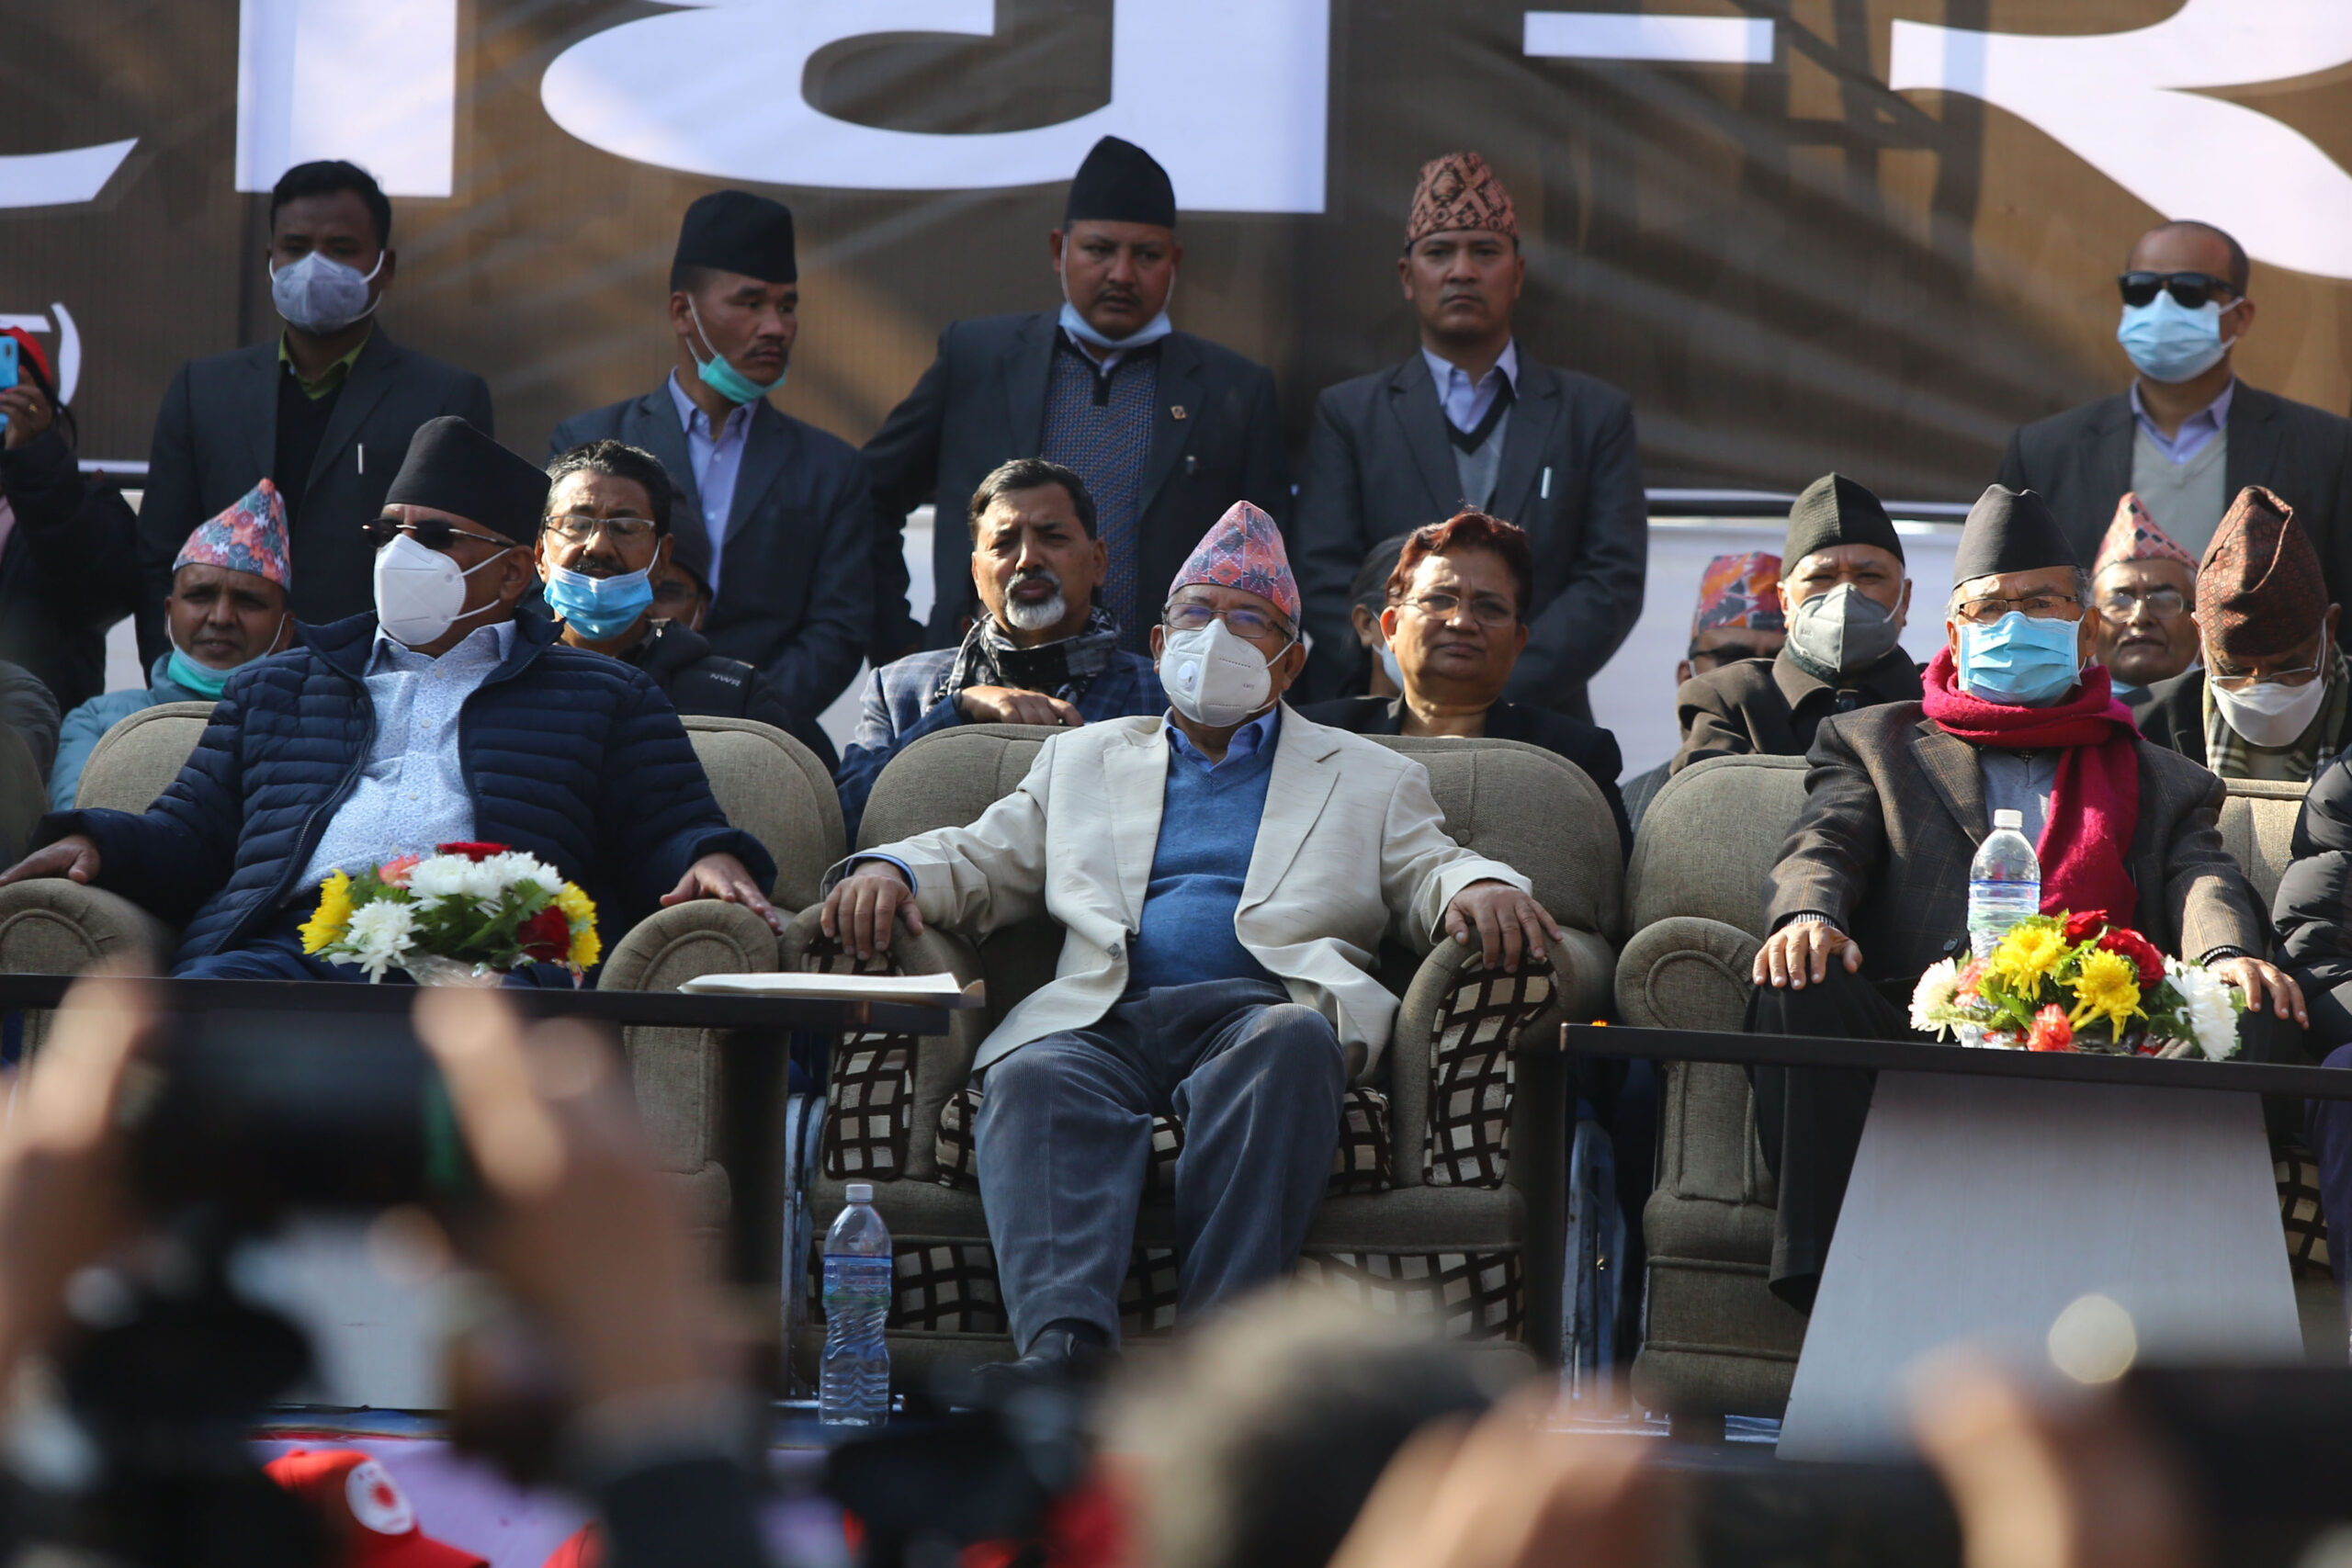 HoR will be reinstated: Chair Nepal